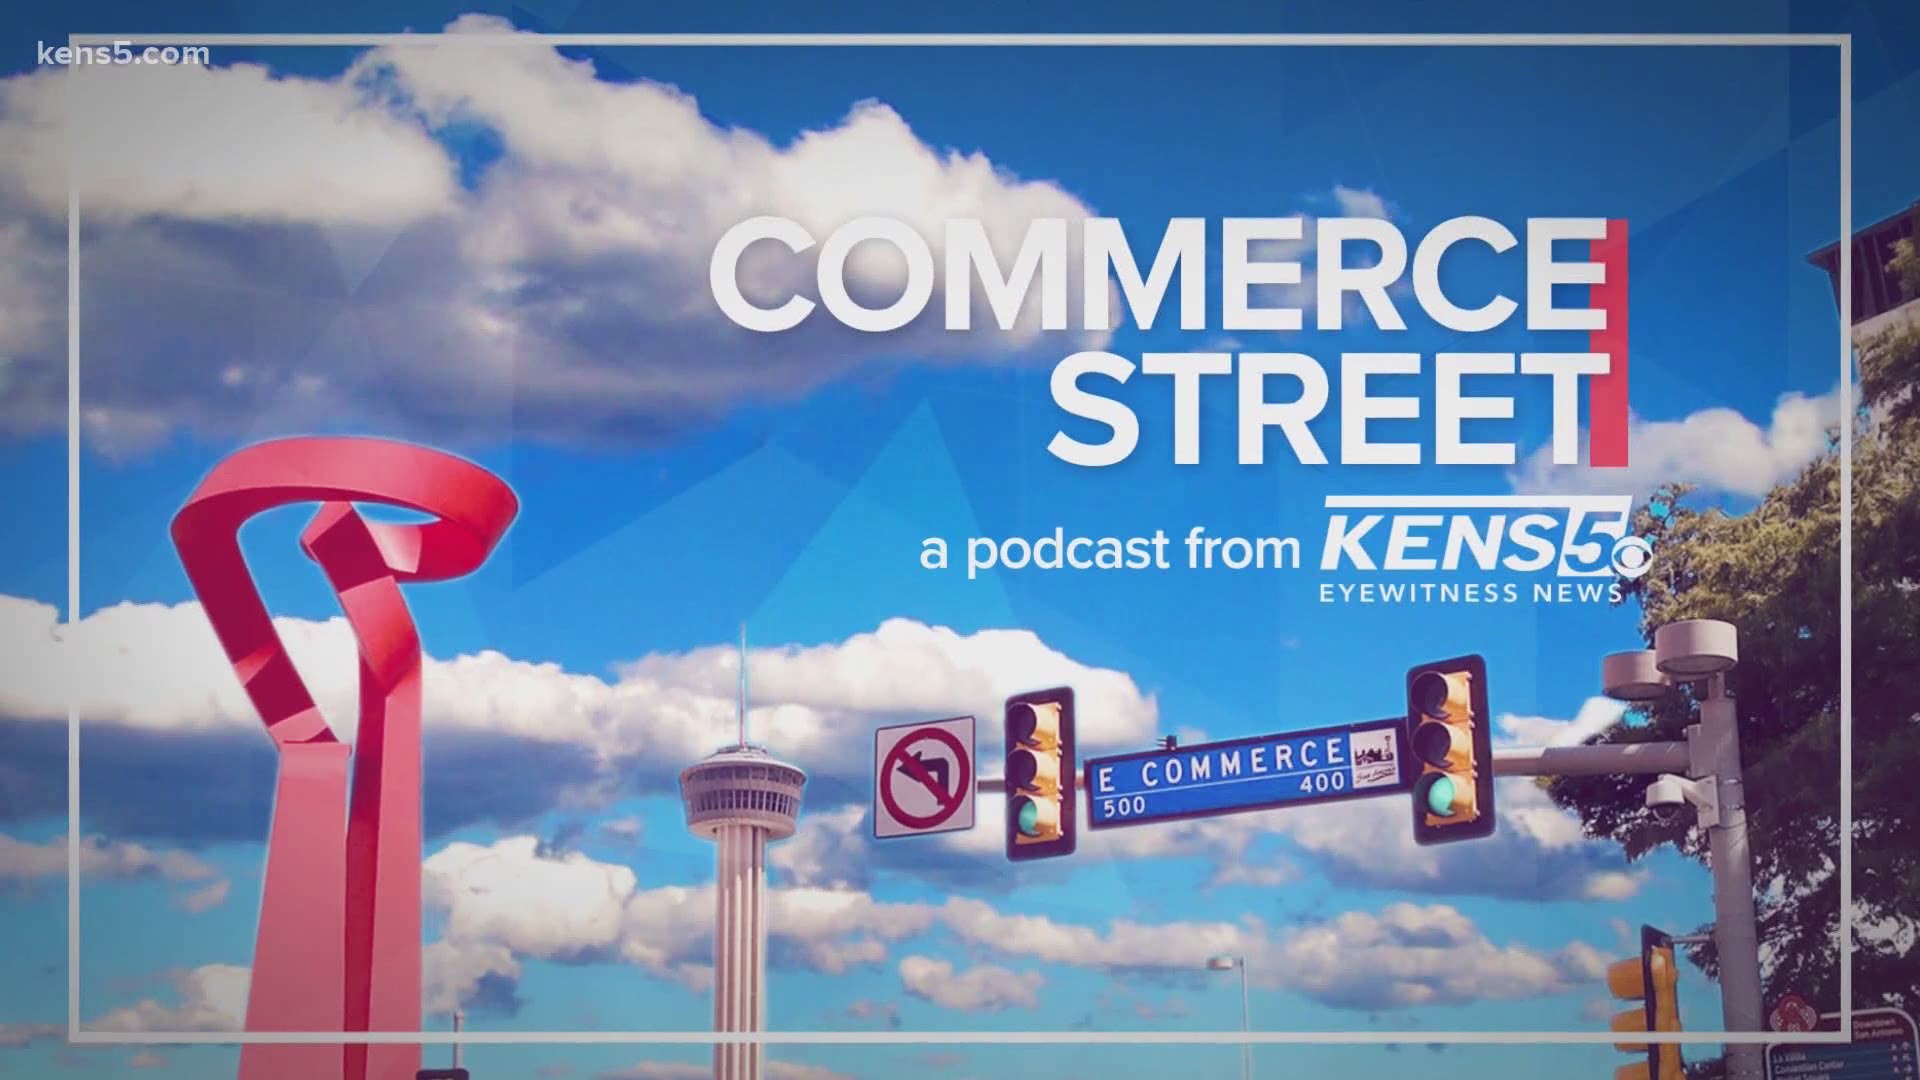 Some of the nation's most unique and groundbreaking research is happening right here in San Antonio. You can learn about it on our Commerce Street podcast.